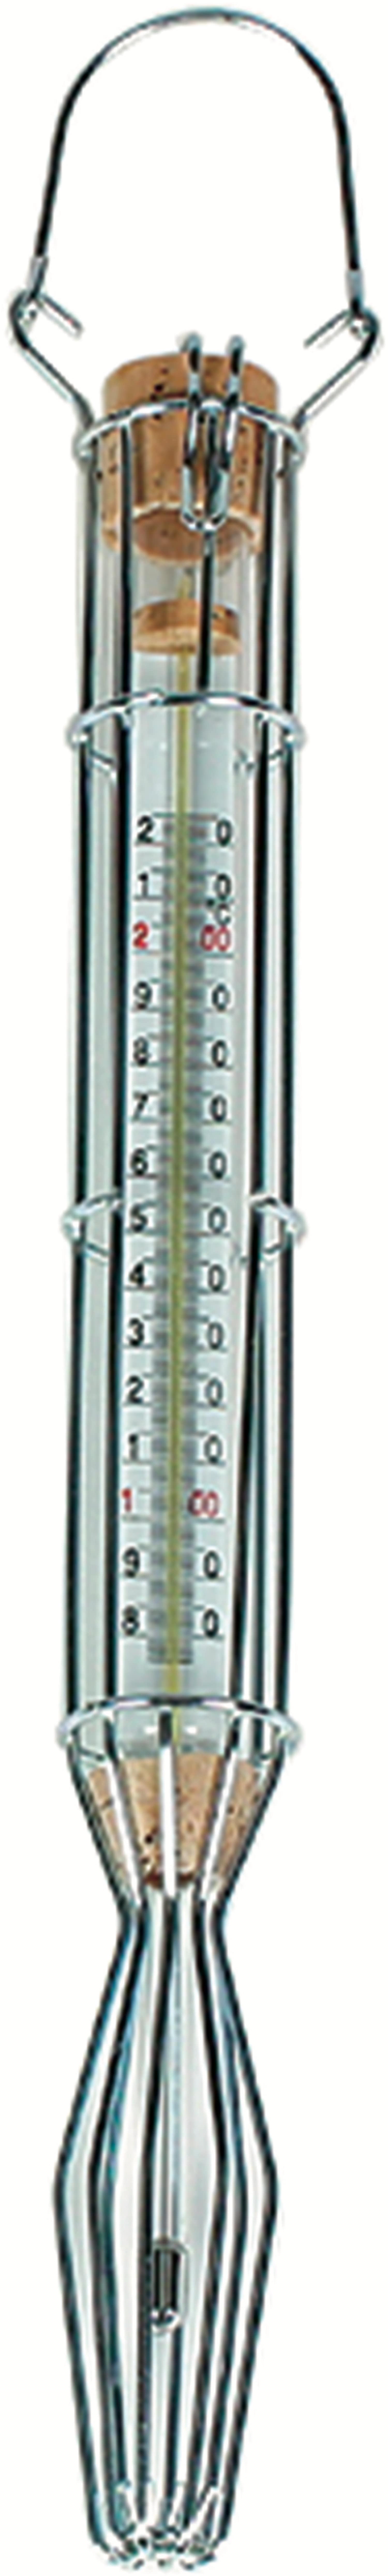 Thermometer 160001